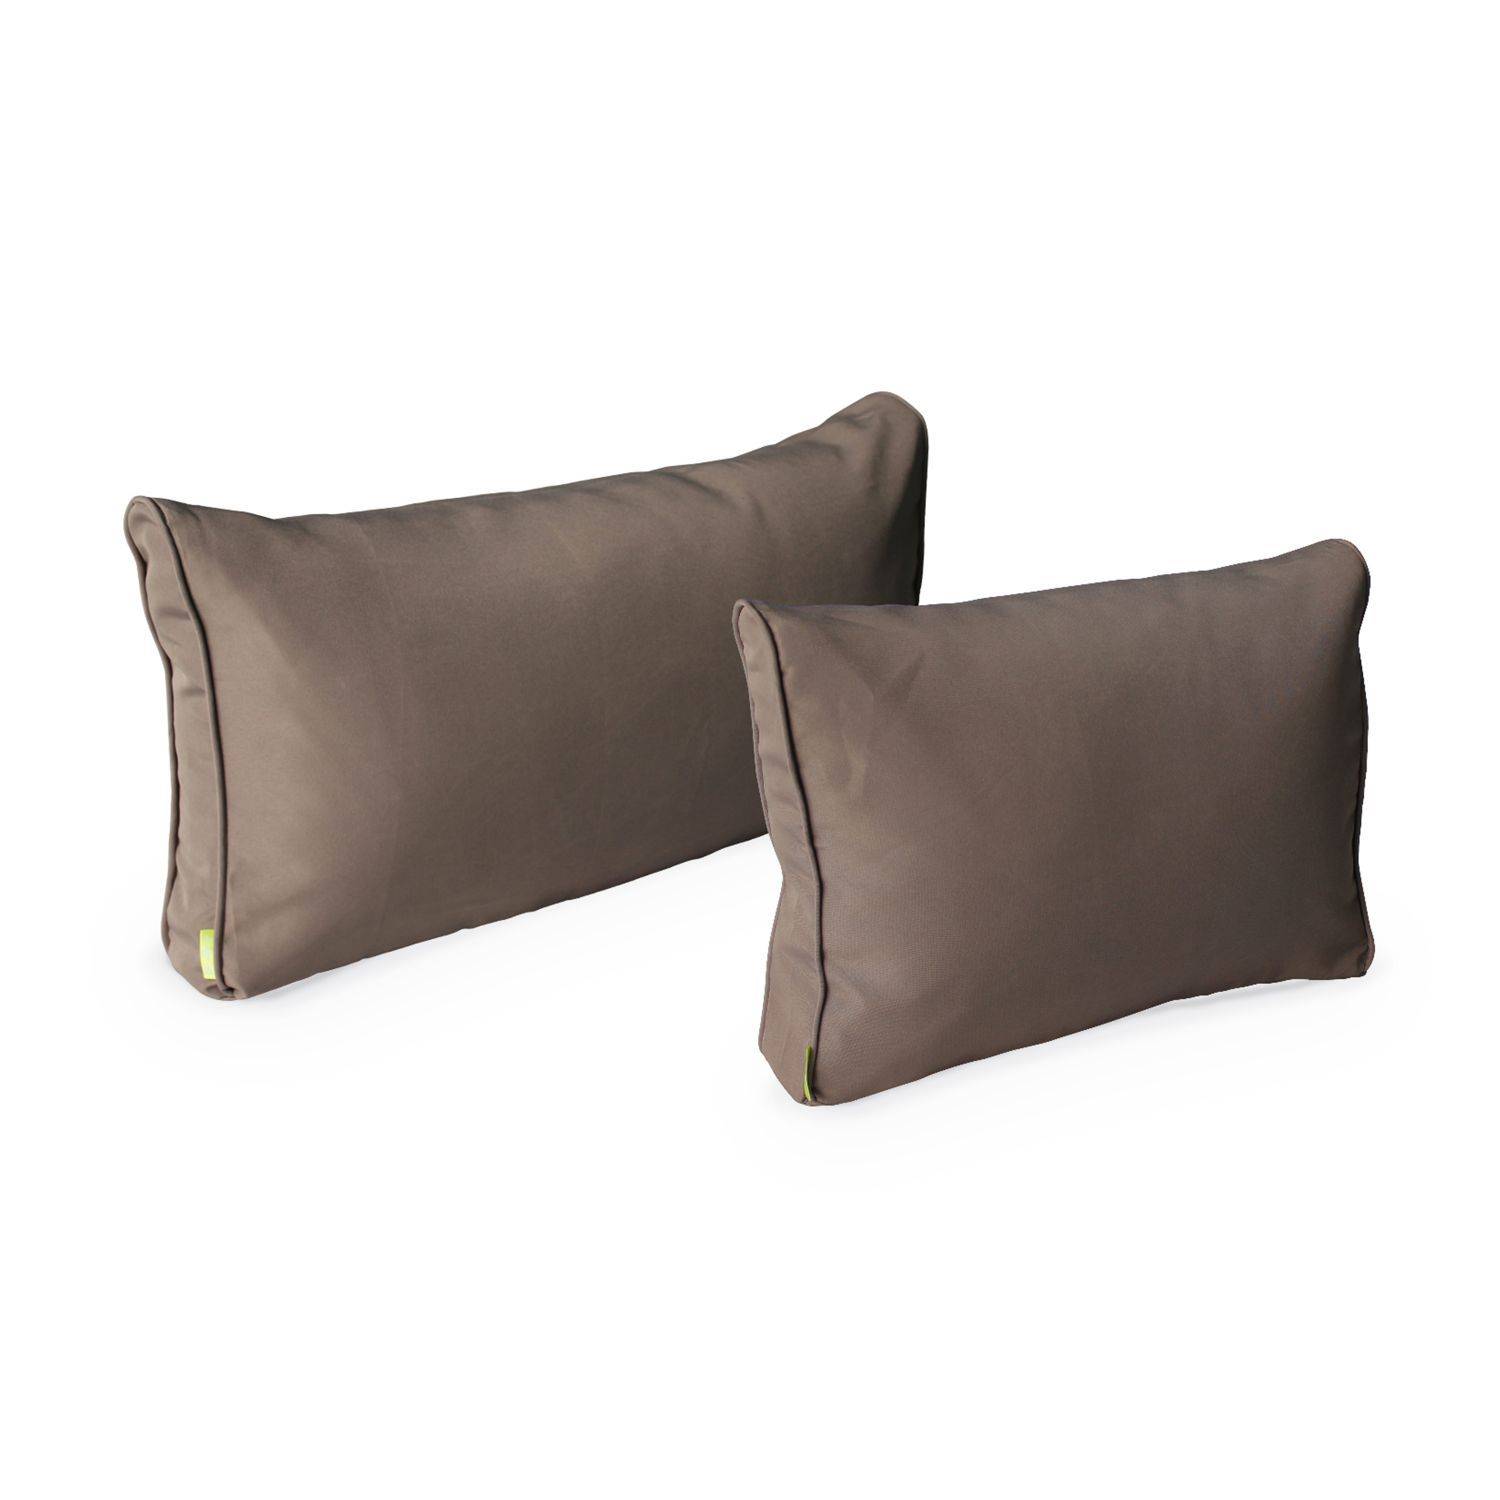 Complete set of cushion covers - Caligari - Beige-Brown Photo3